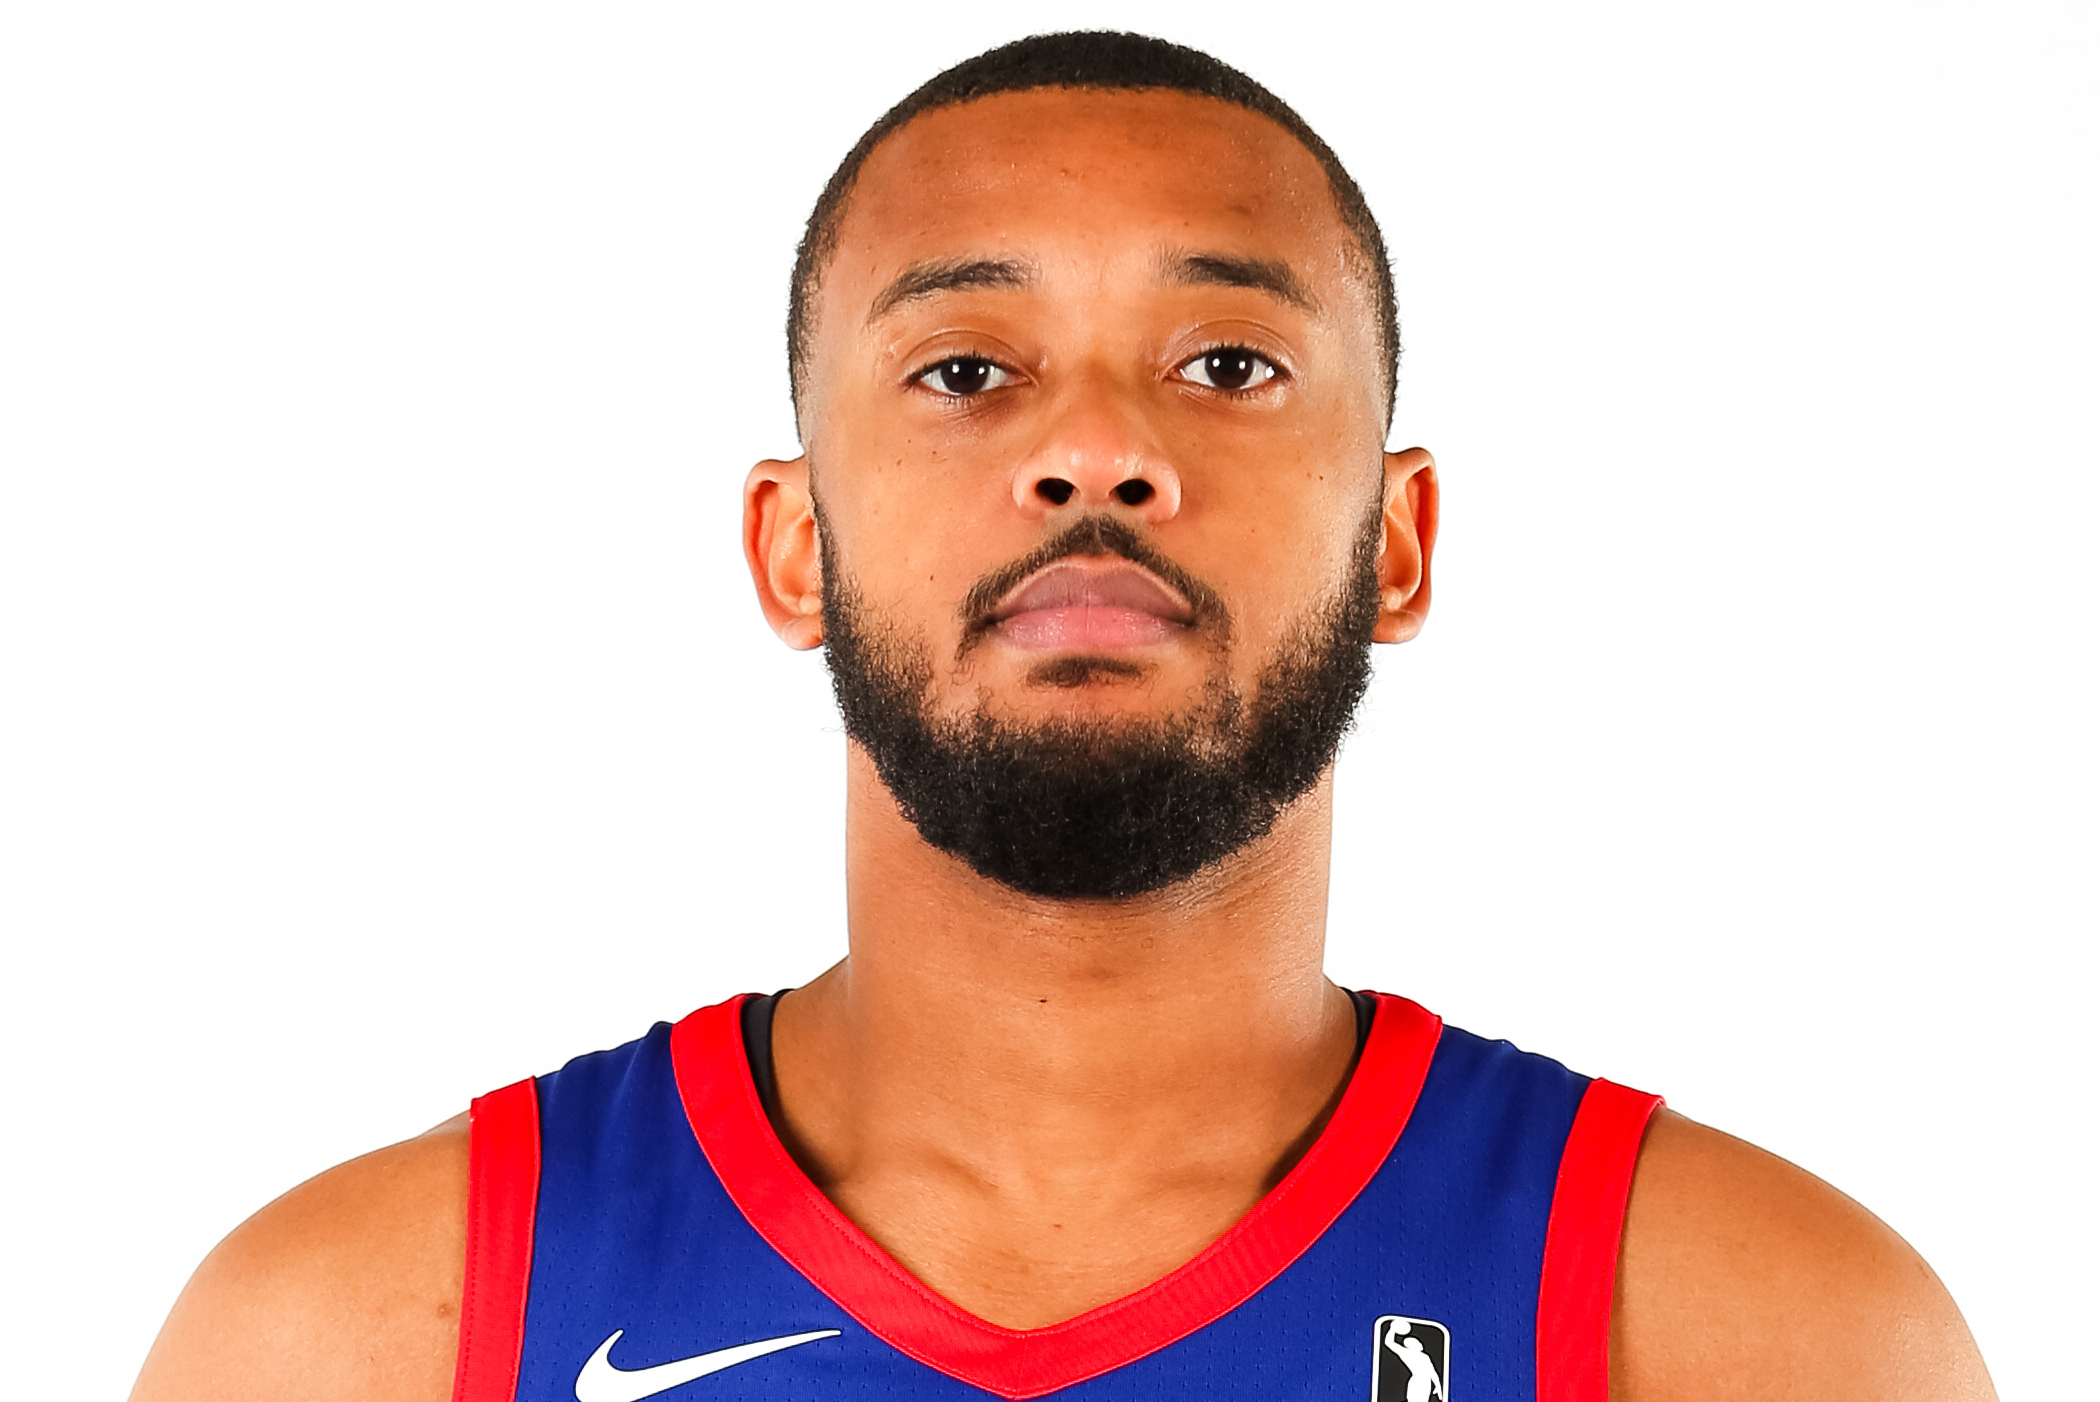 Forgotten NBA star and now G League champion wakes up unemployed